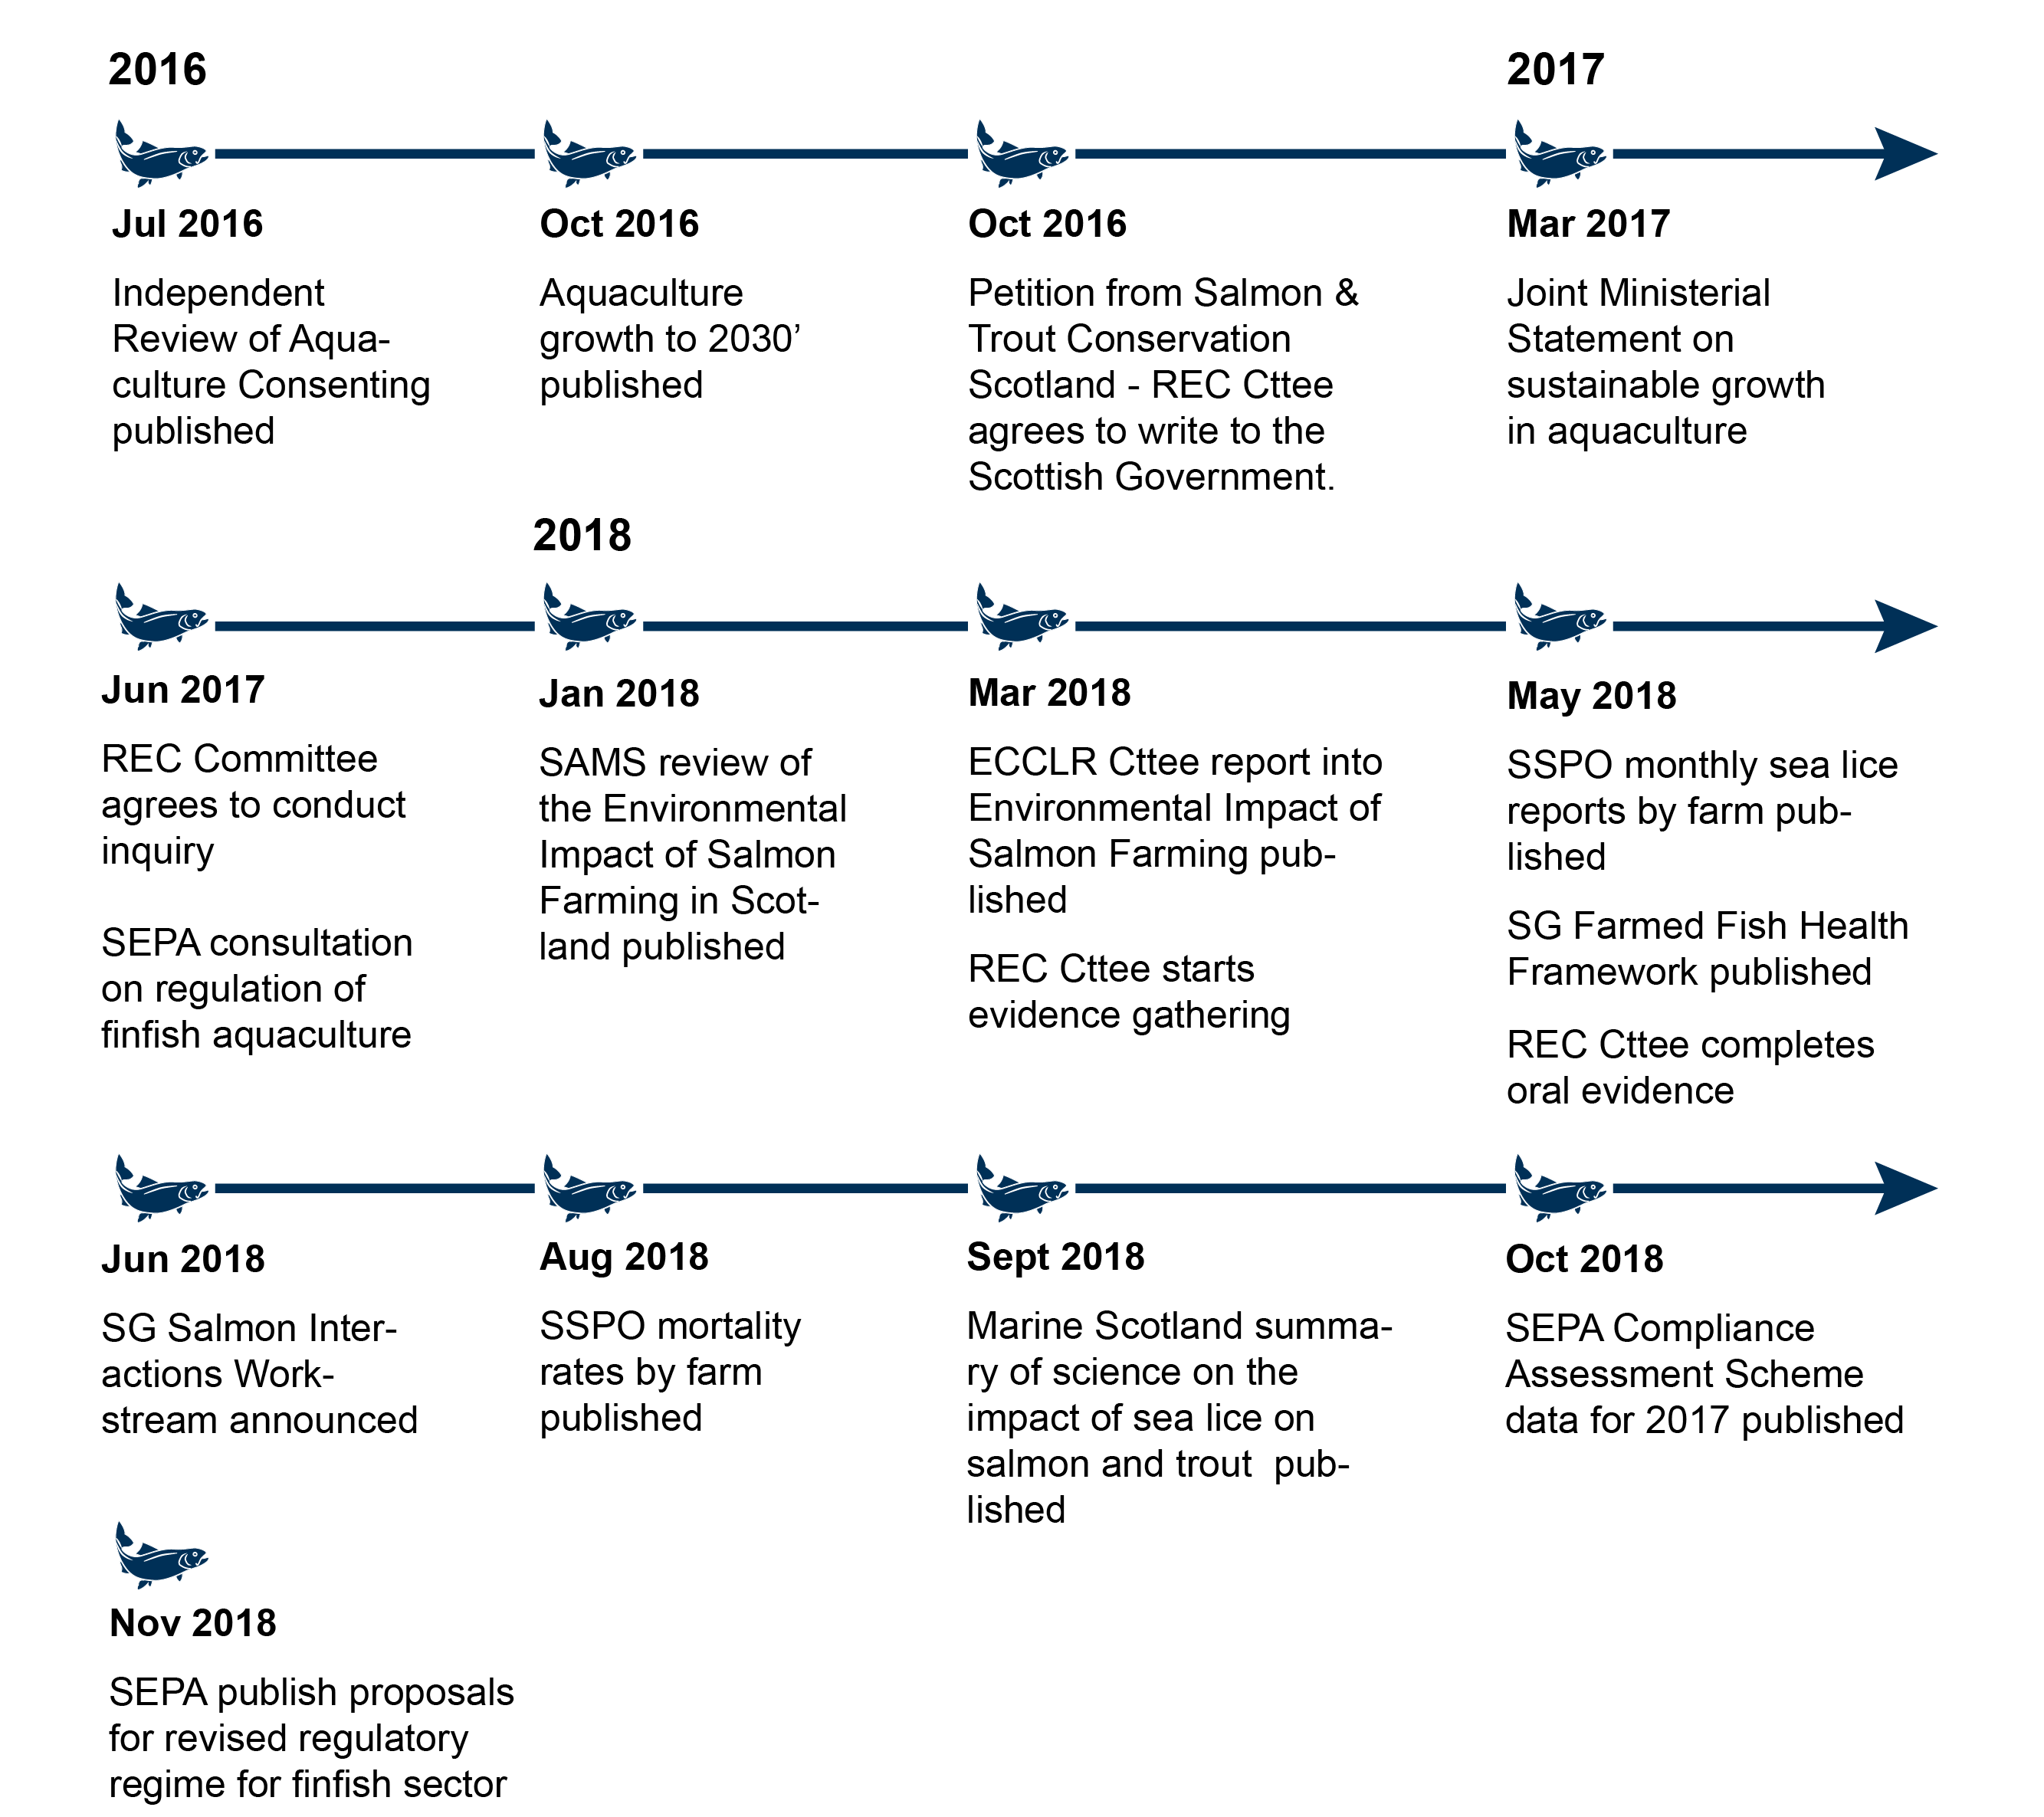  Infographic showing a timeline of recent developments in the farmed salmon industry (SPICe)